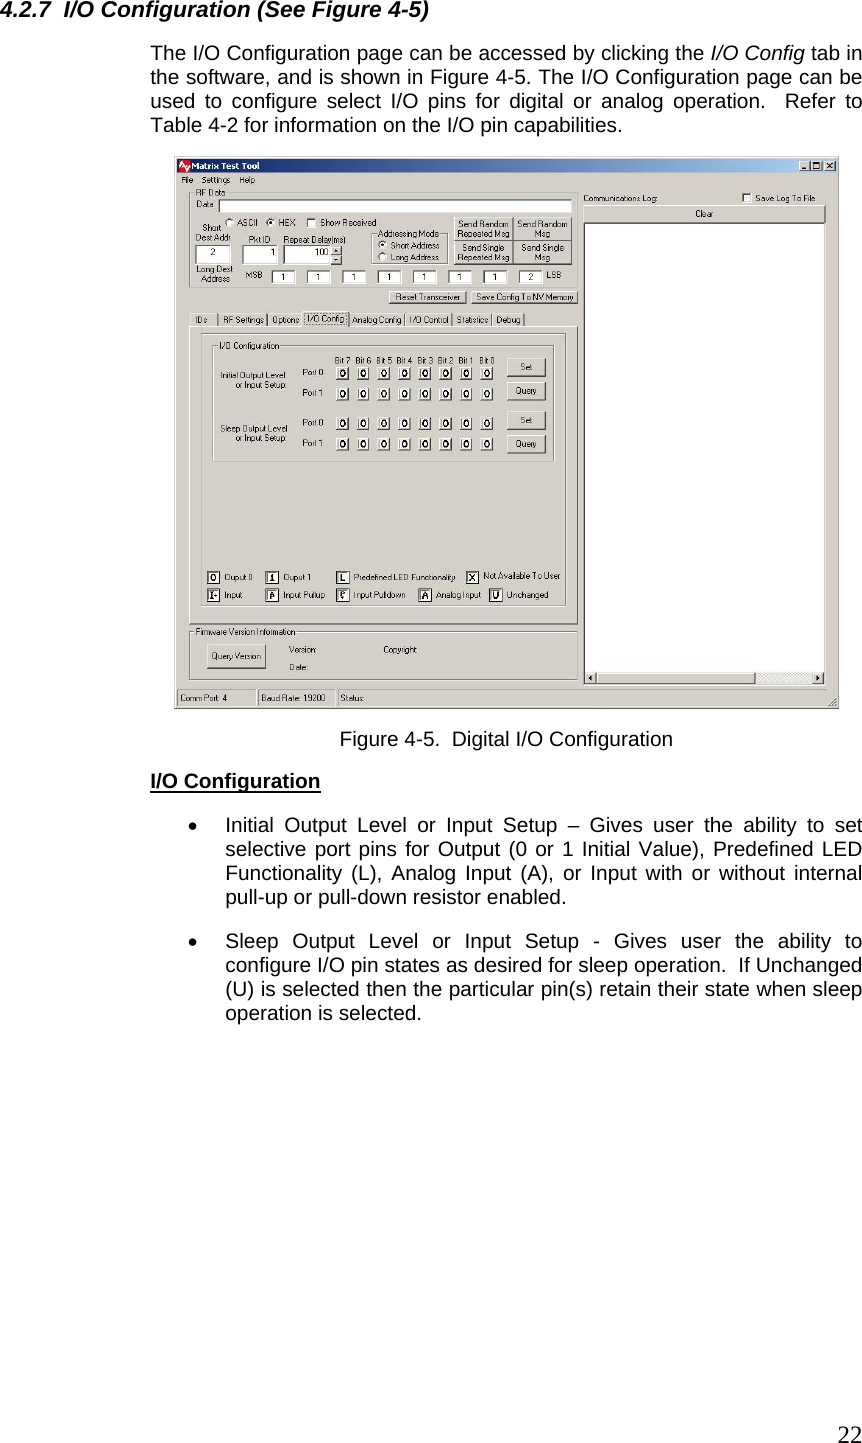  224.2.7  I/O Configuration (See Figure 4-5) The I/O Configuration page can be accessed by clicking the I/O Config tab in the software, and is shown in Figure 4-5. The I/O Configuration page can be used to configure select I/O pins for digital or analog operation.  Refer to Table 4-2 for information on the I/O pin capabilities.  Figure 4-5.  Digital I/O Configuration  I/O Configuration •  Initial Output Level or Input Setup – Gives user the ability to set selective port pins for Output (0 or 1 Initial Value), Predefined LED Functionality (L), Analog Input (A), or Input with or without internal pull-up or pull-down resistor enabled. •  Sleep Output Level or Input Setup - Gives user the ability to configure I/O pin states as desired for sleep operation.  If Unchanged (U) is selected then the particular pin(s) retain their state when sleep operation is selected. 